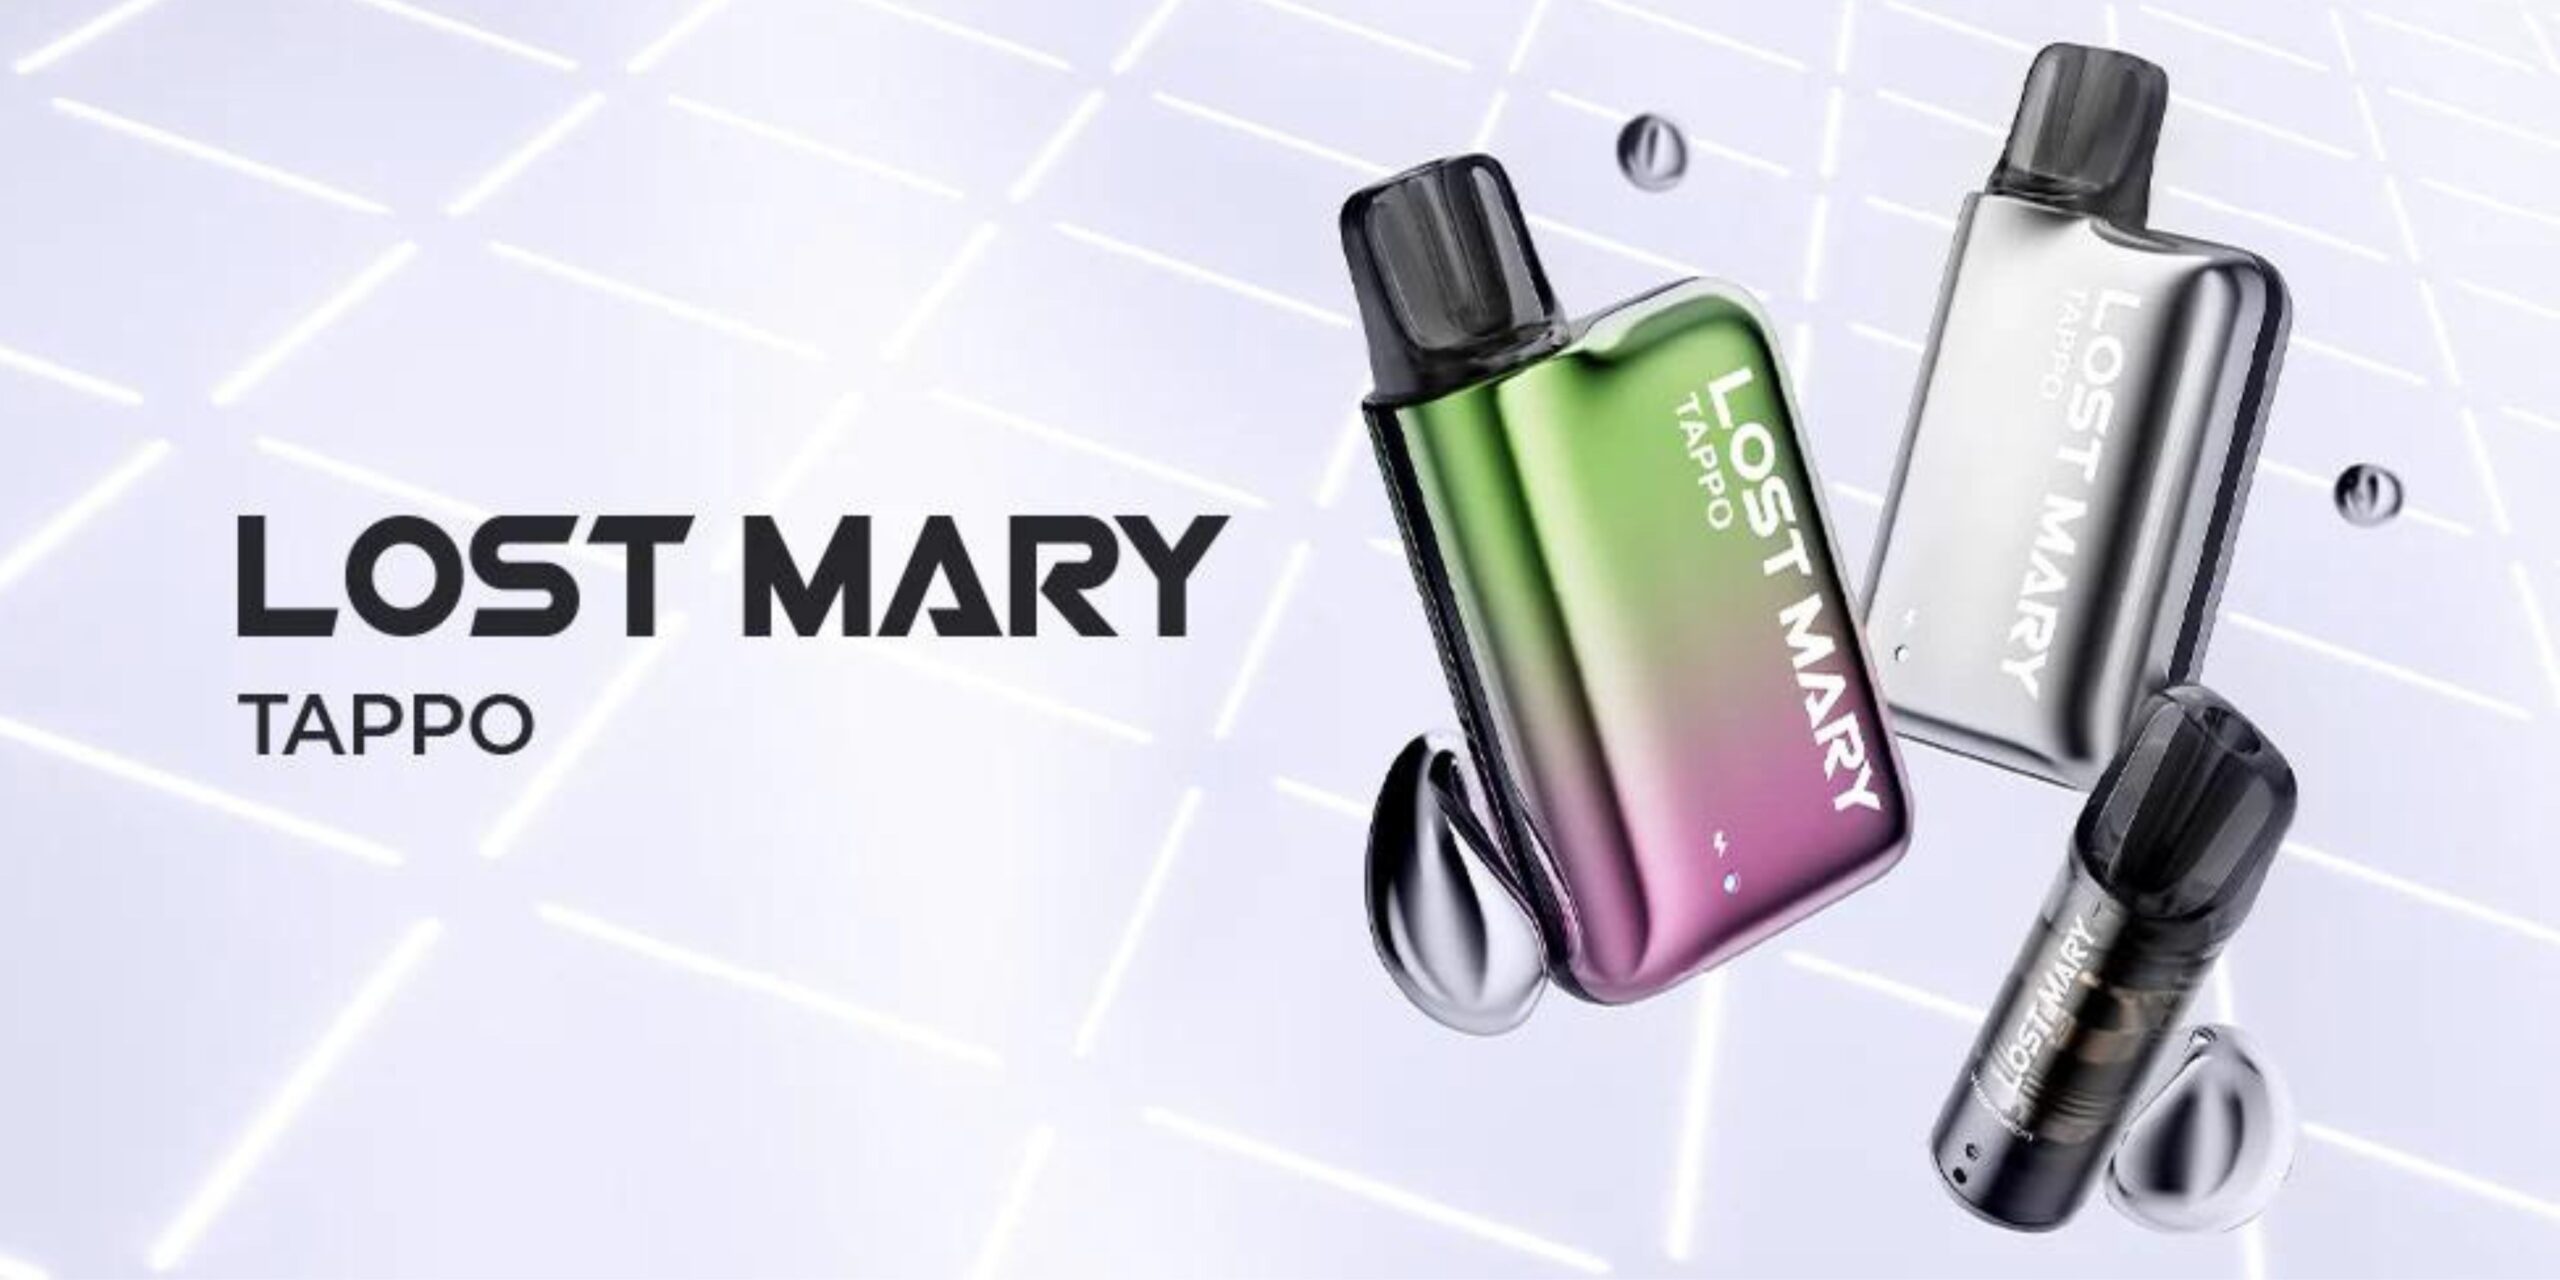 LOST MARY TAPPO – Strawberry Ice (Replacement Prefilled Pods) VAPING - XMANIA Ireland 15